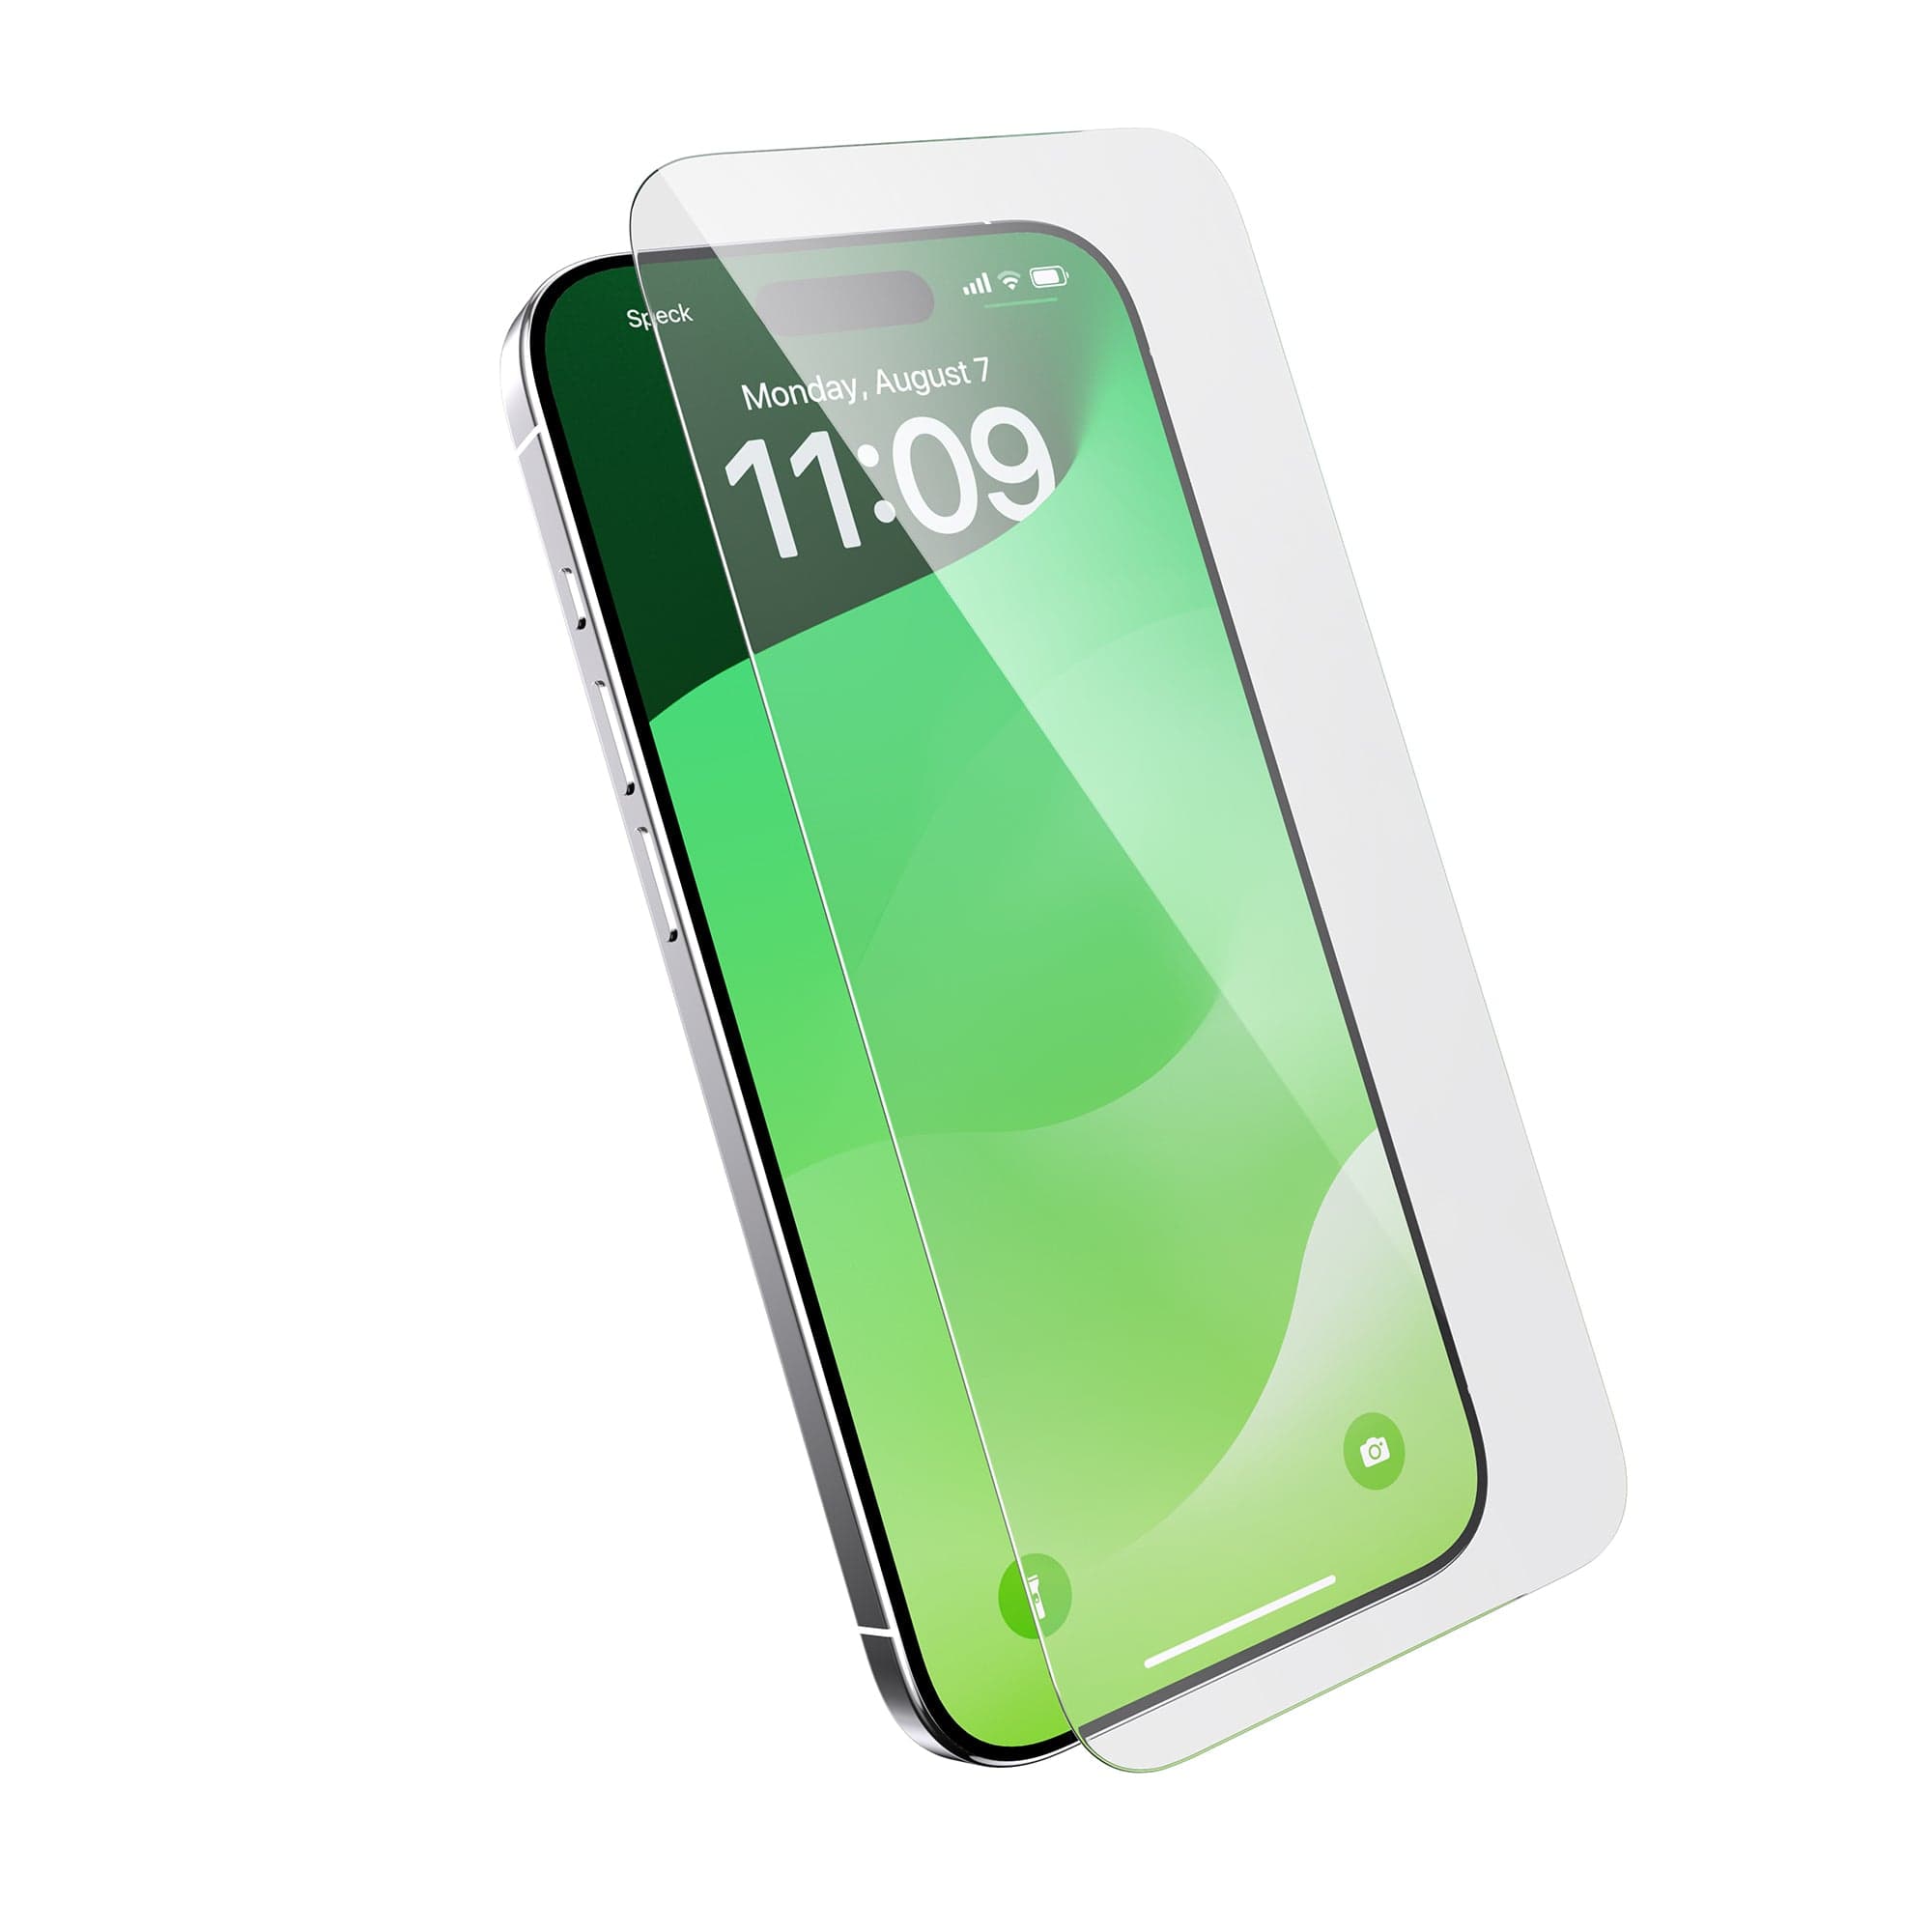 iPhone 15 Screen Protector, Full Cover Glass